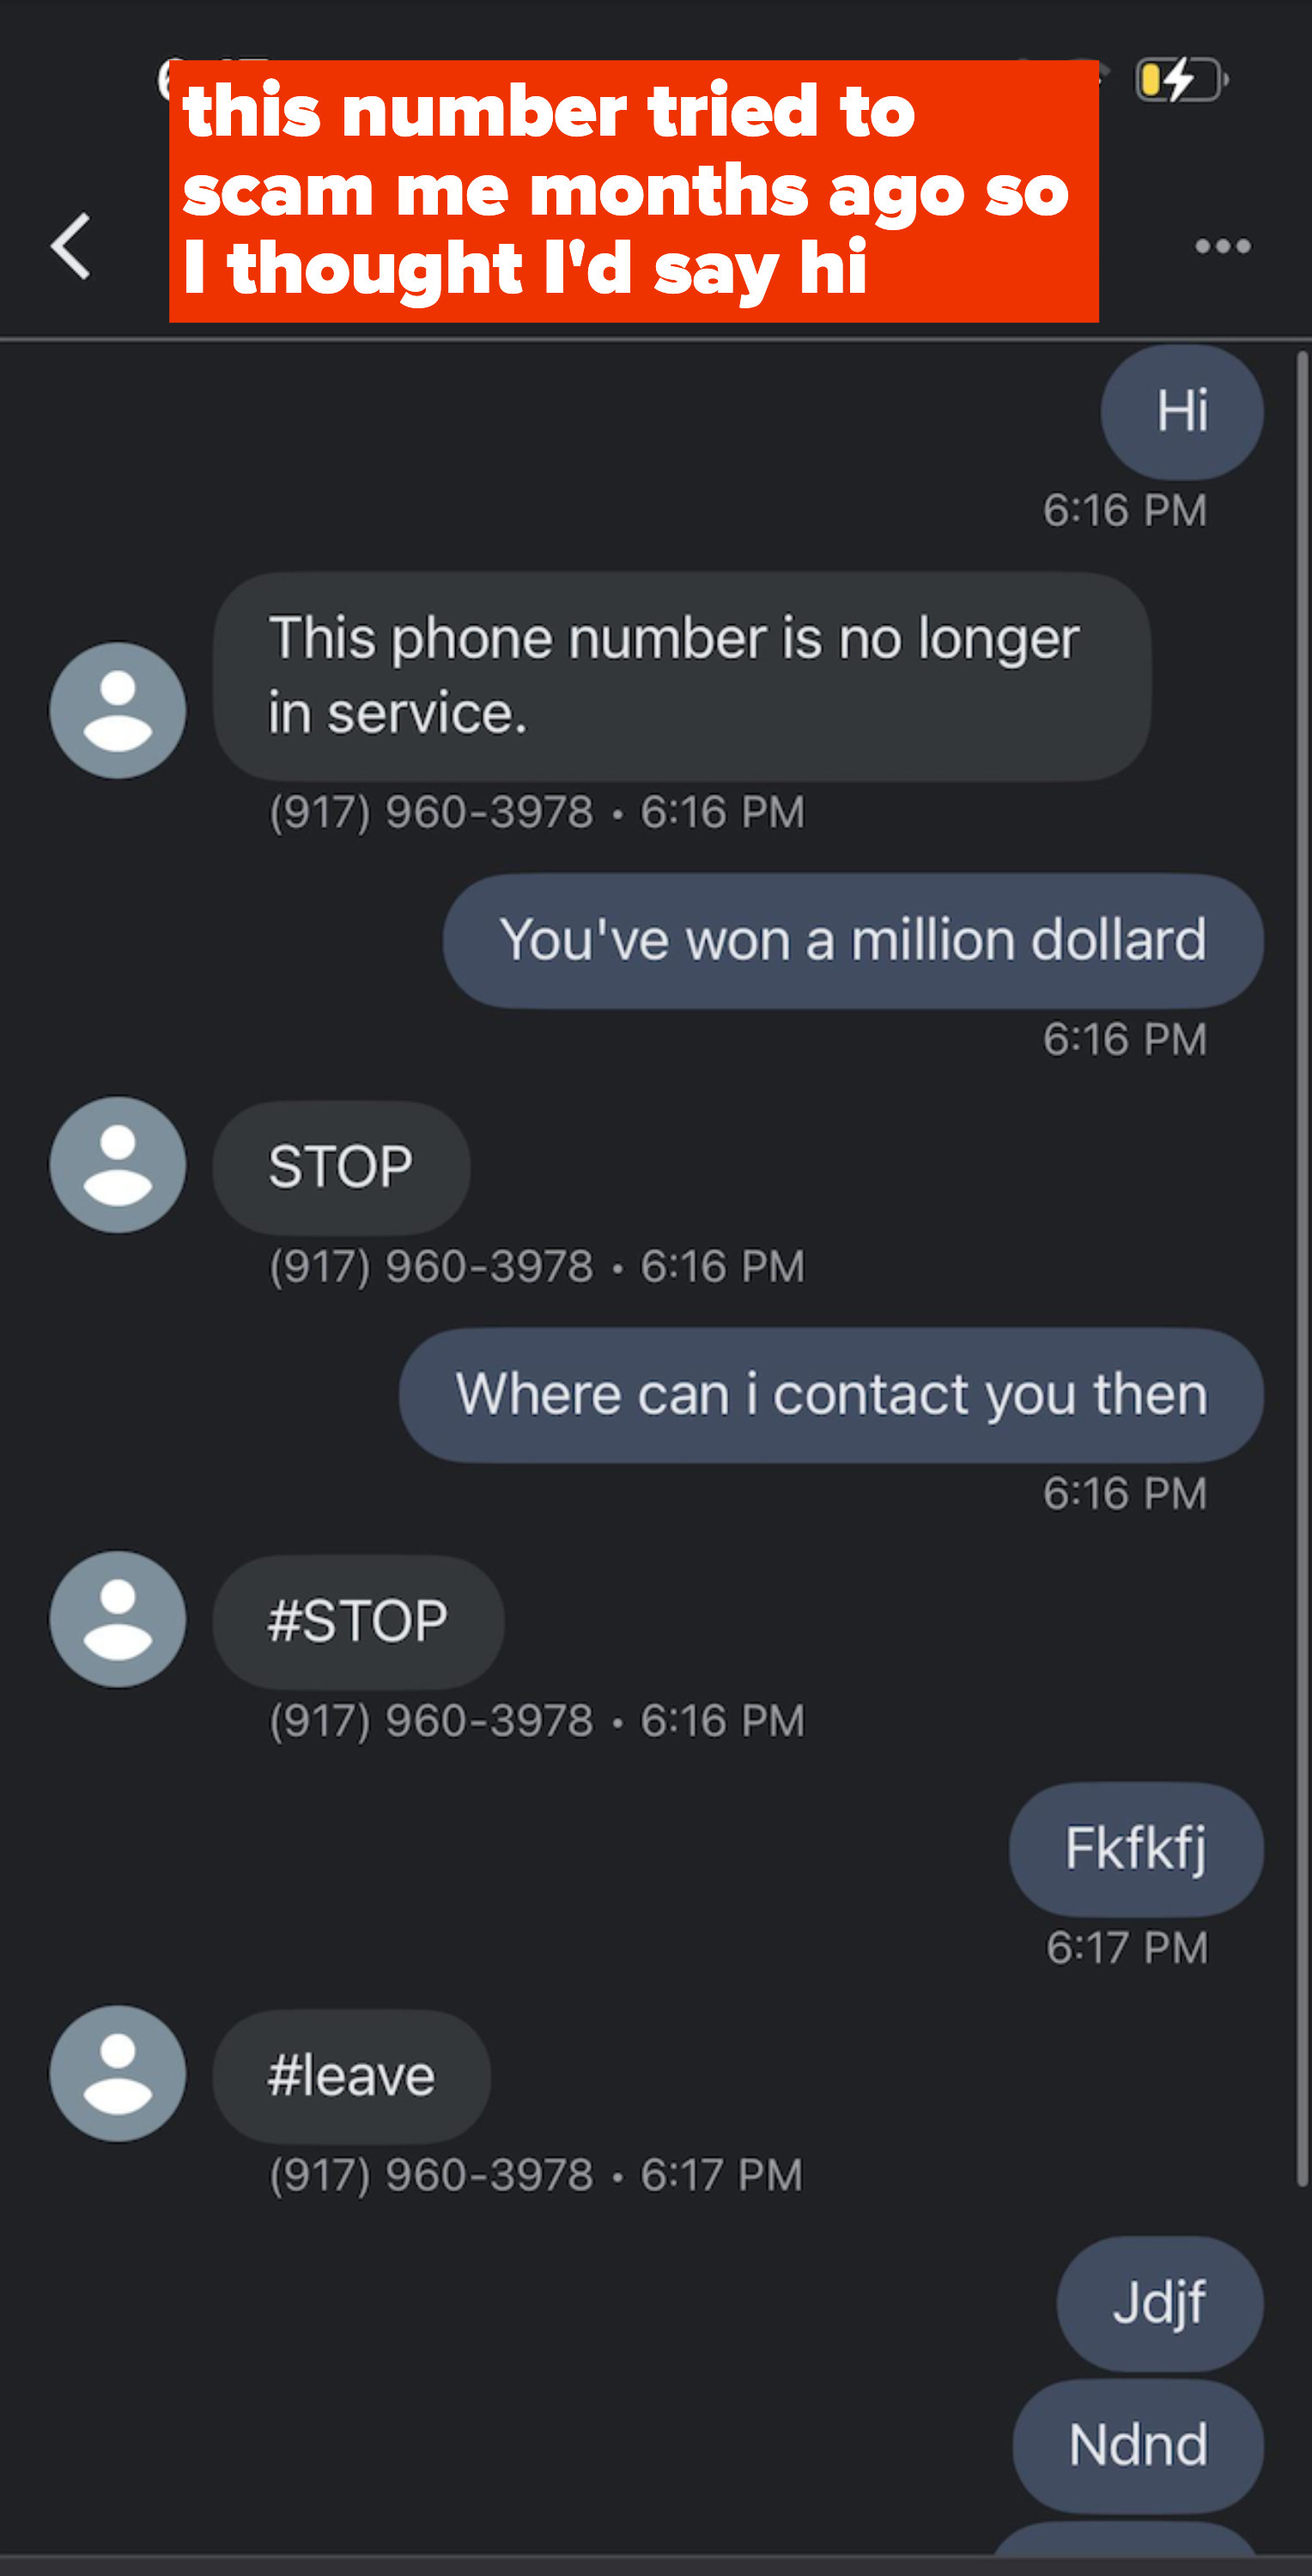 person texts a scammer back after a long time and it bothers the scammer